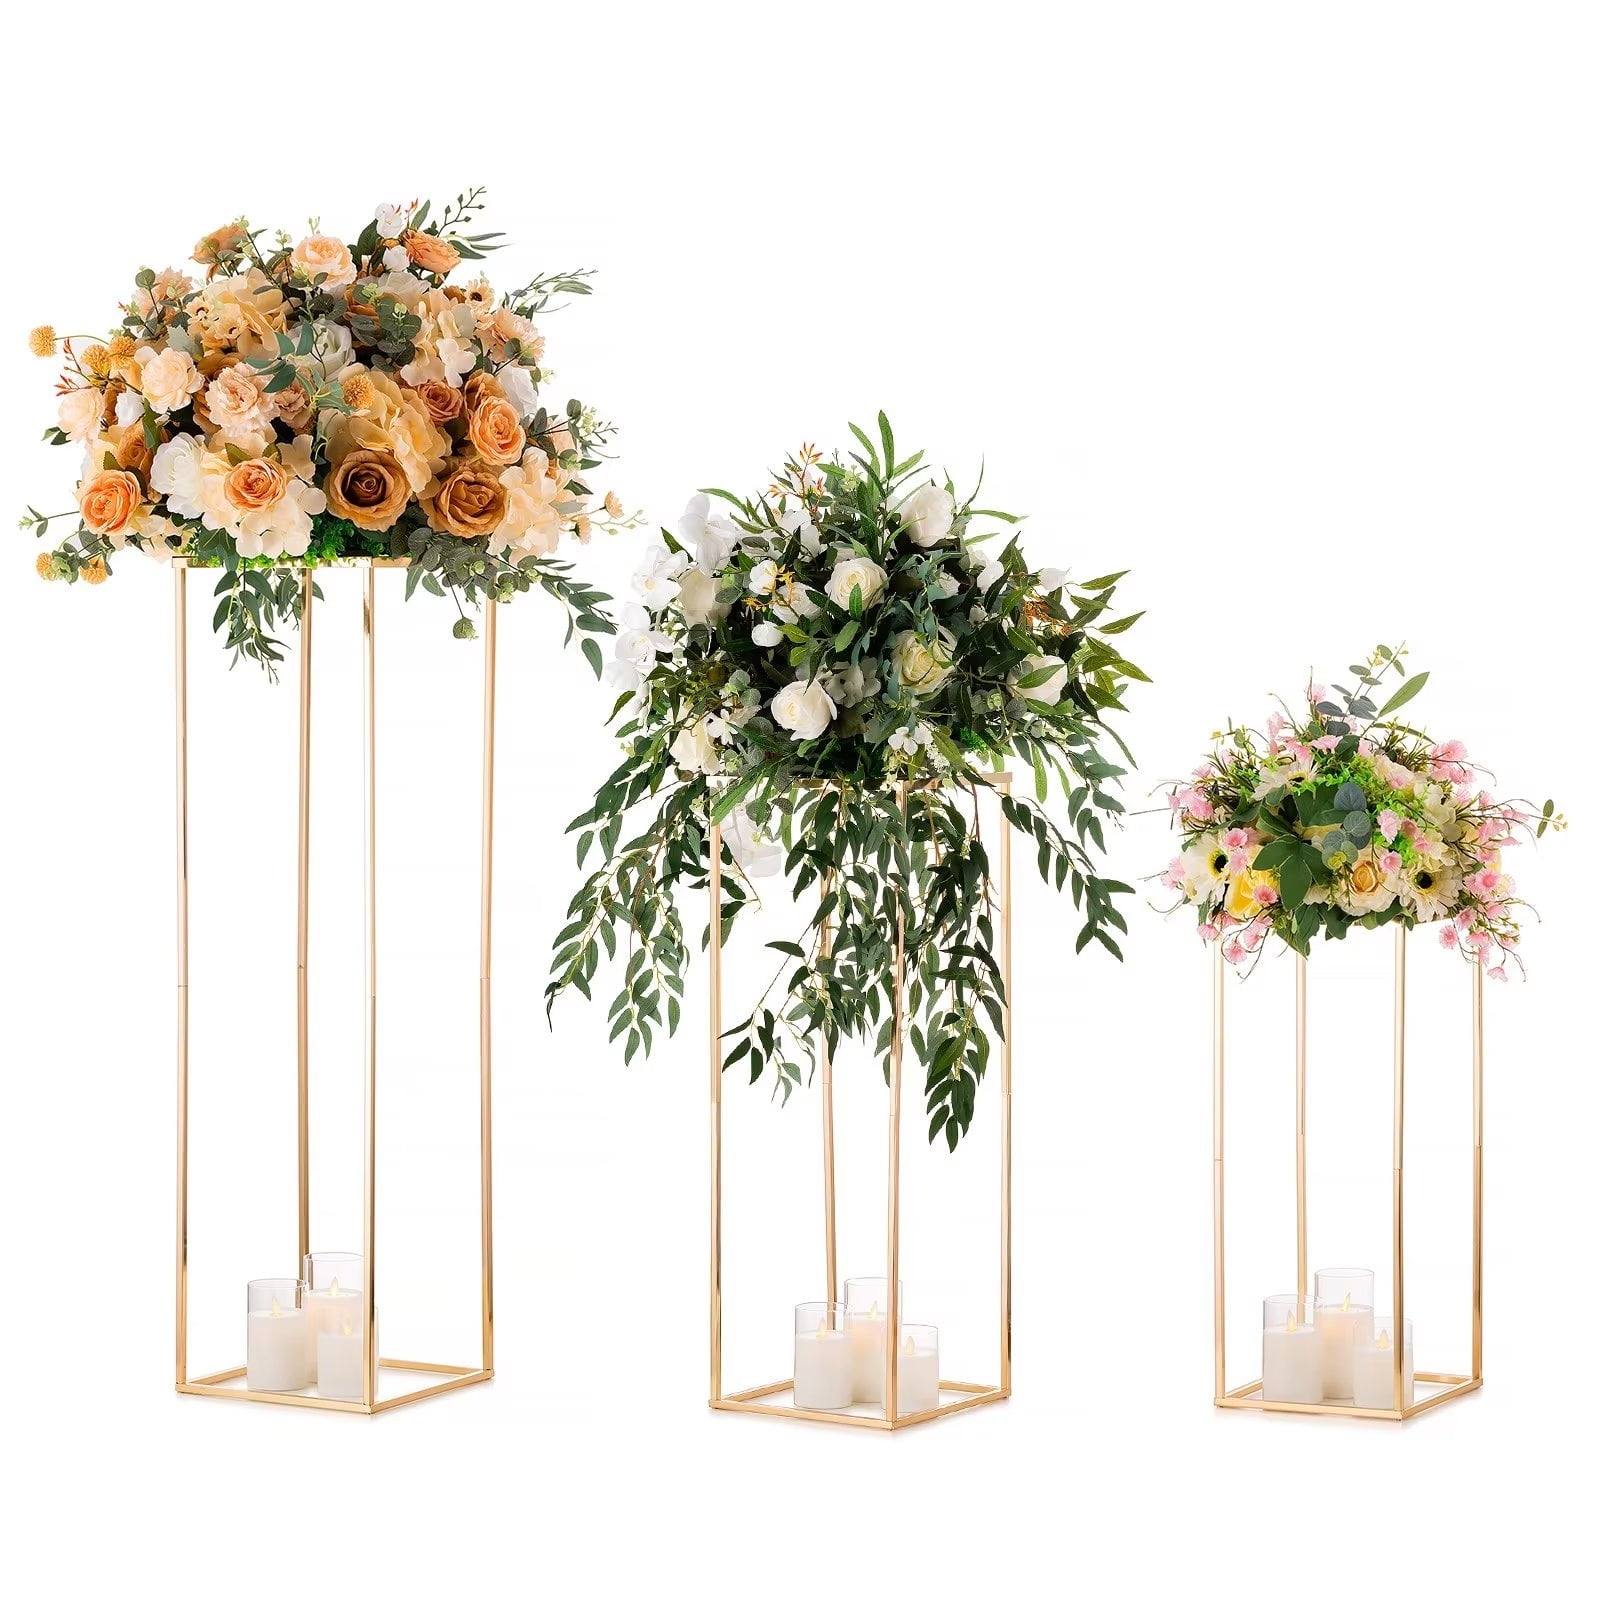 Sziqiqi Wedding Centerpieces for Tables Gold - Tall Metal Flower Stand  Decorations for Weddings Party Metal Floor Geometric Vases for Events  Reception